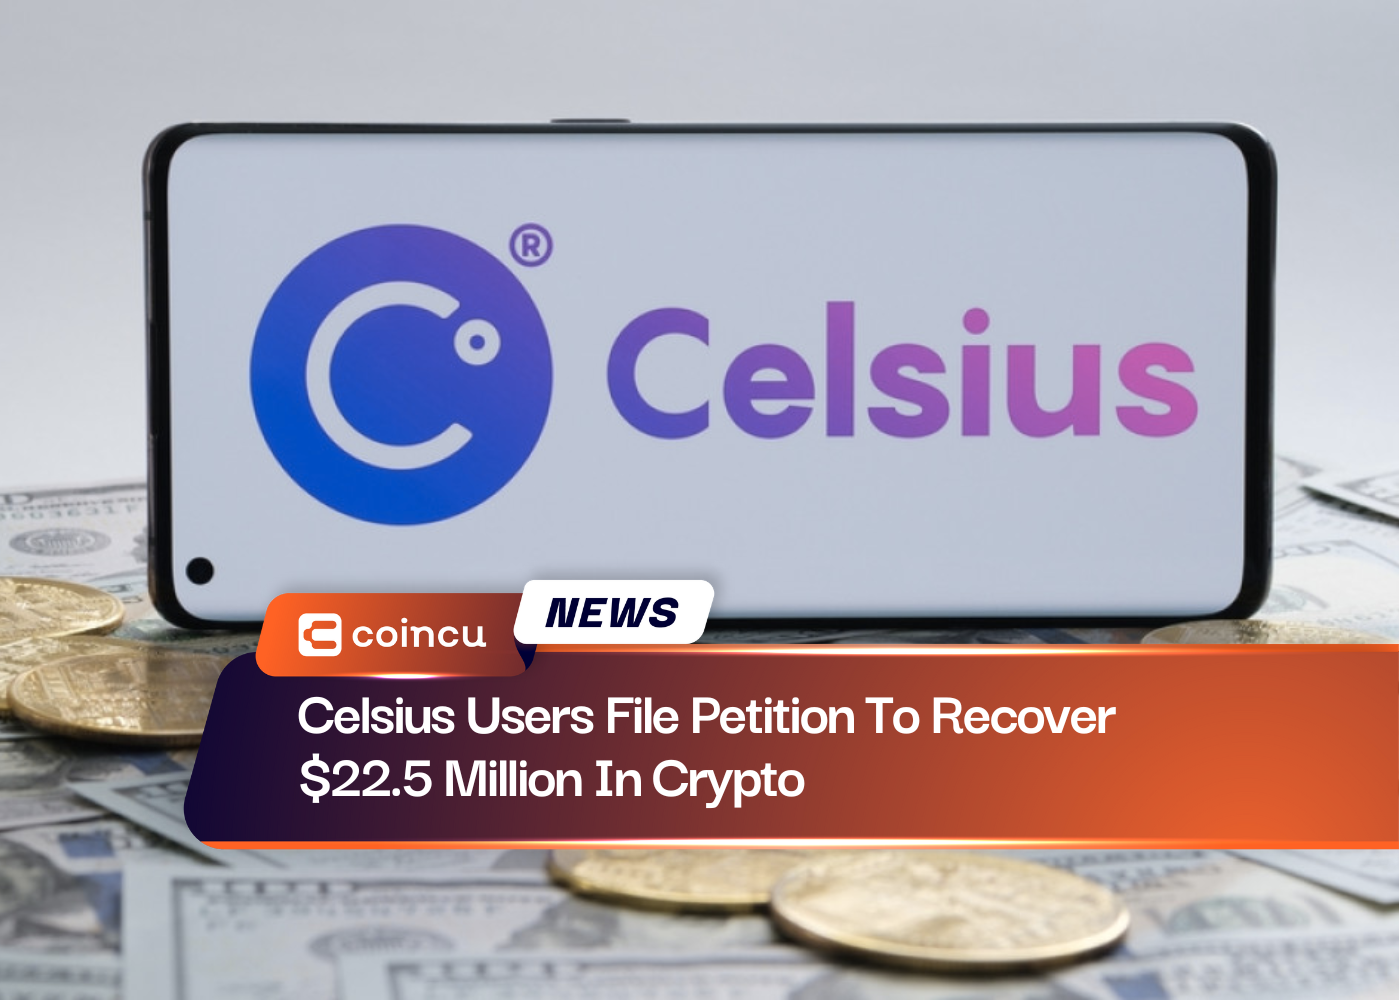 Celsius Users File Petition To Recover $22.5 Million In Crypto